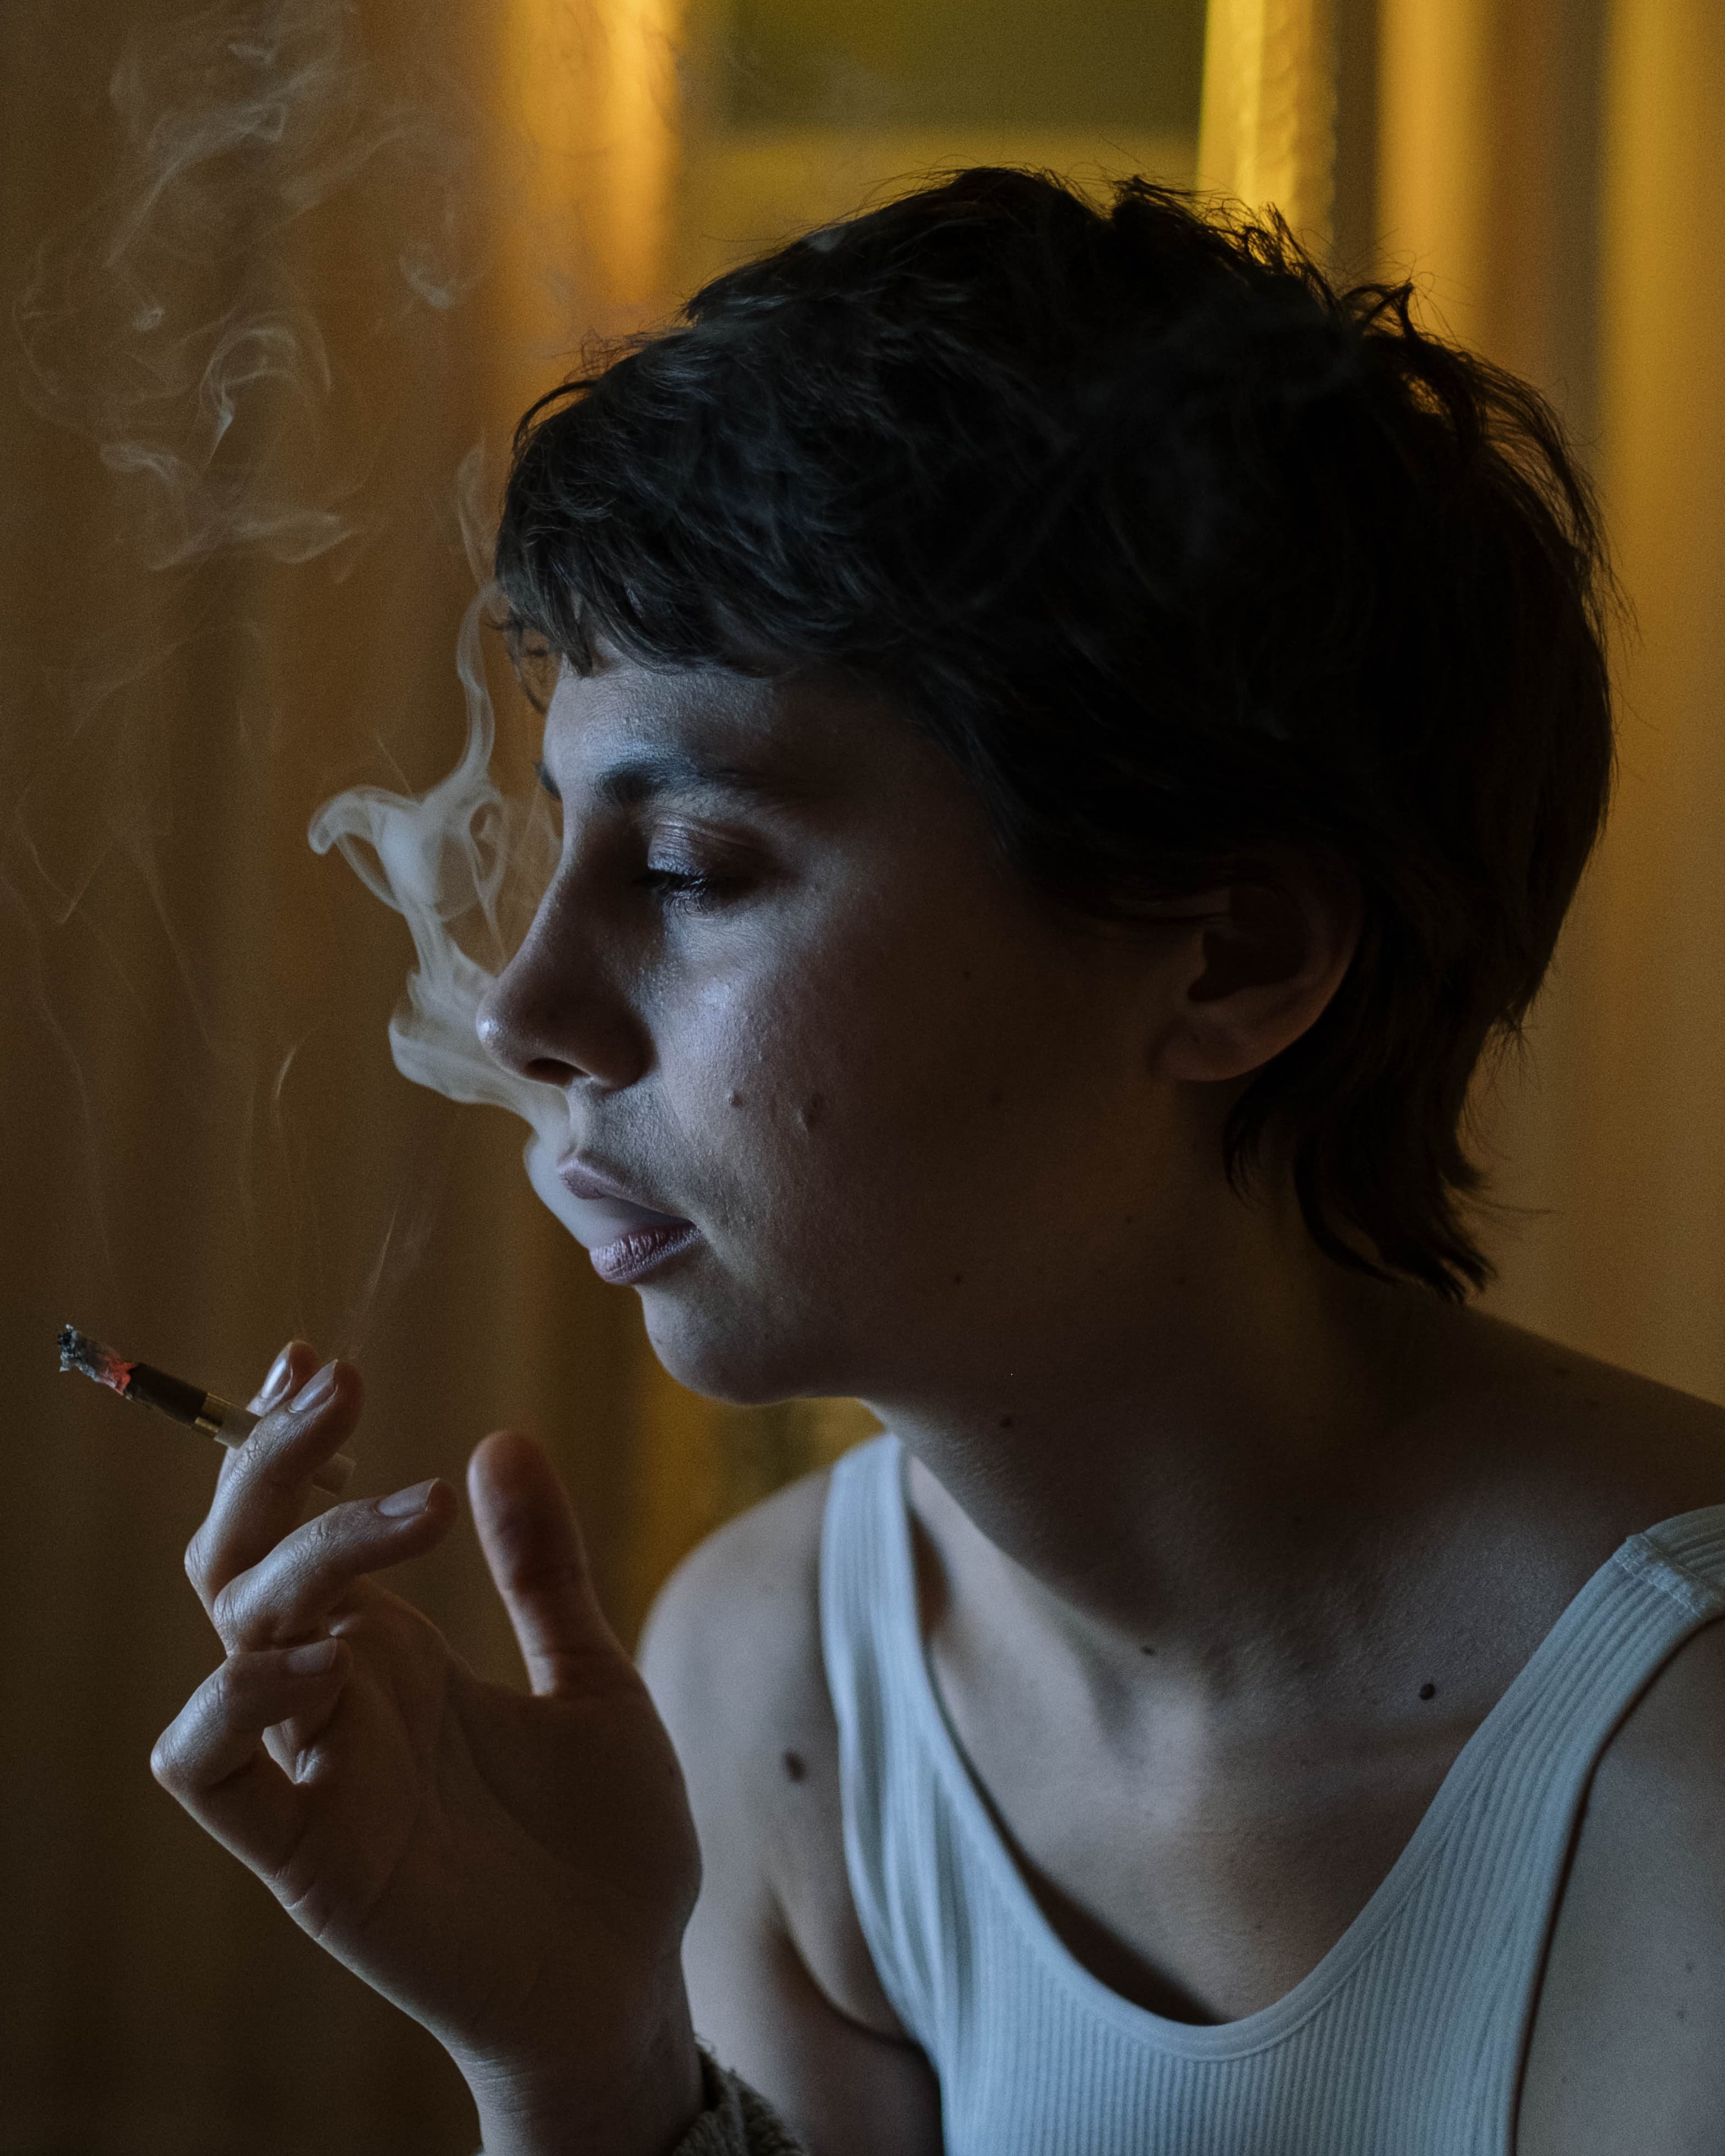 Photo of a woman with short hair smoking a cigarette